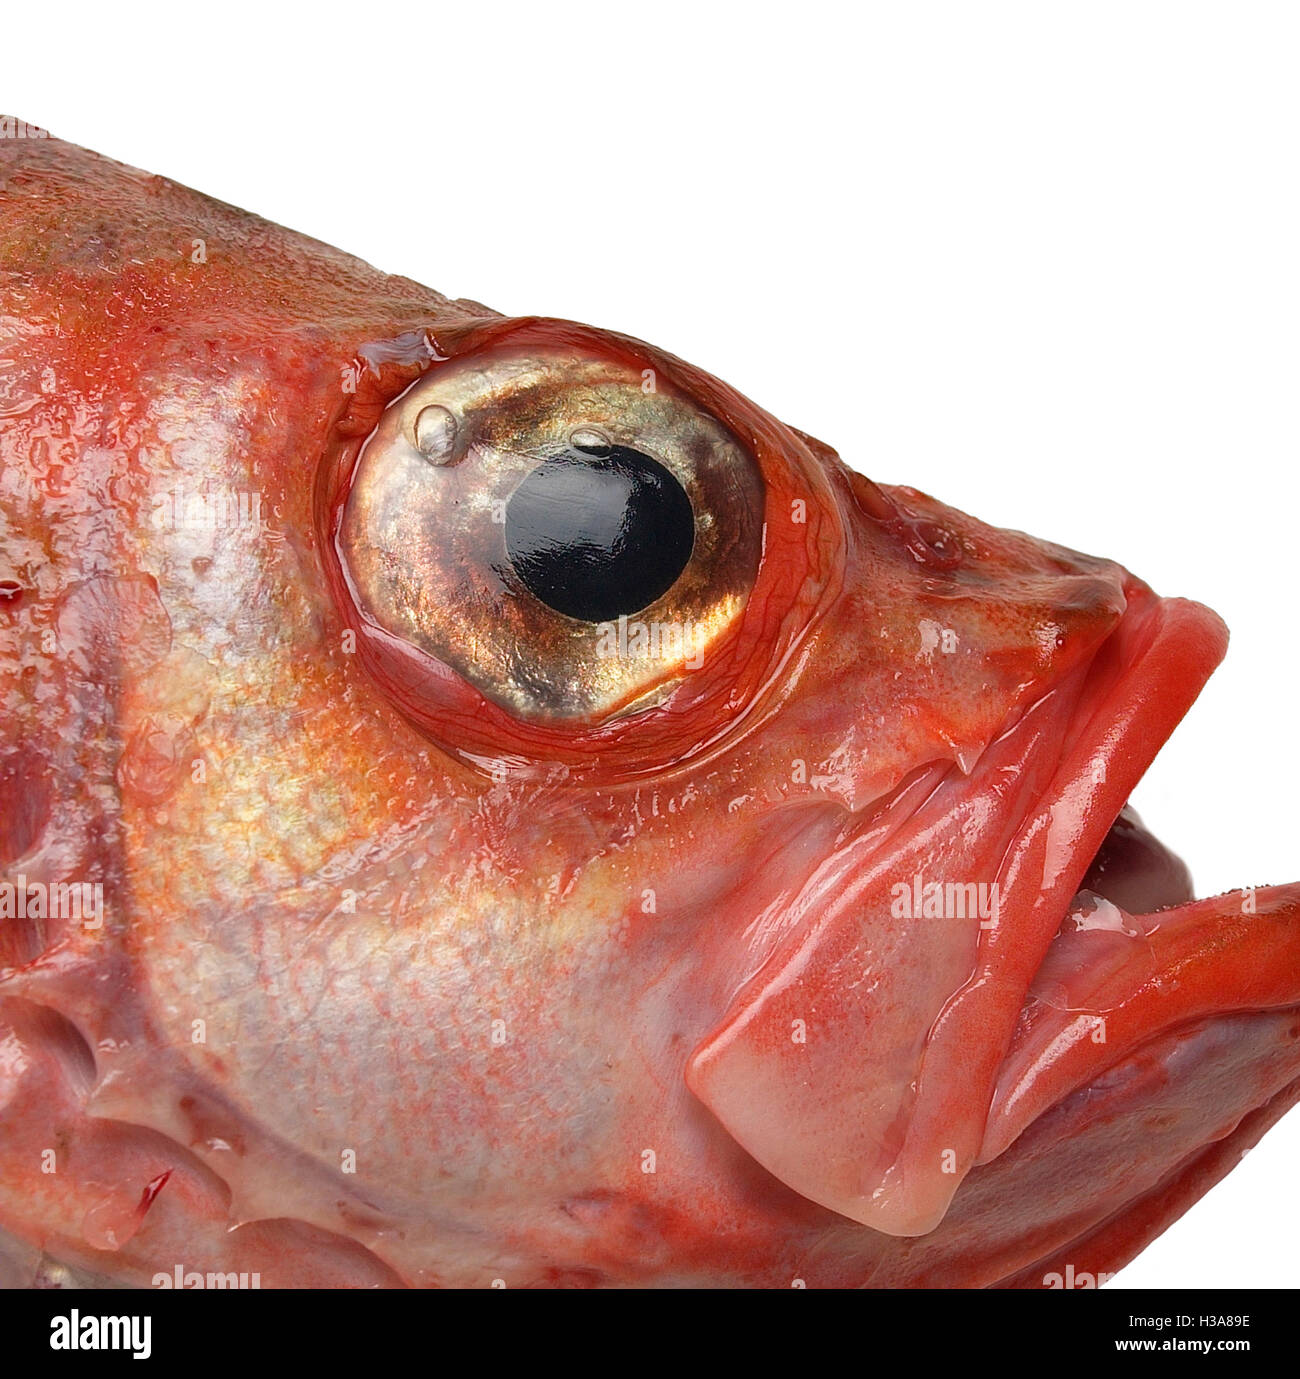 Close-up of ocean perch or redfish, Iceland Stock Photo